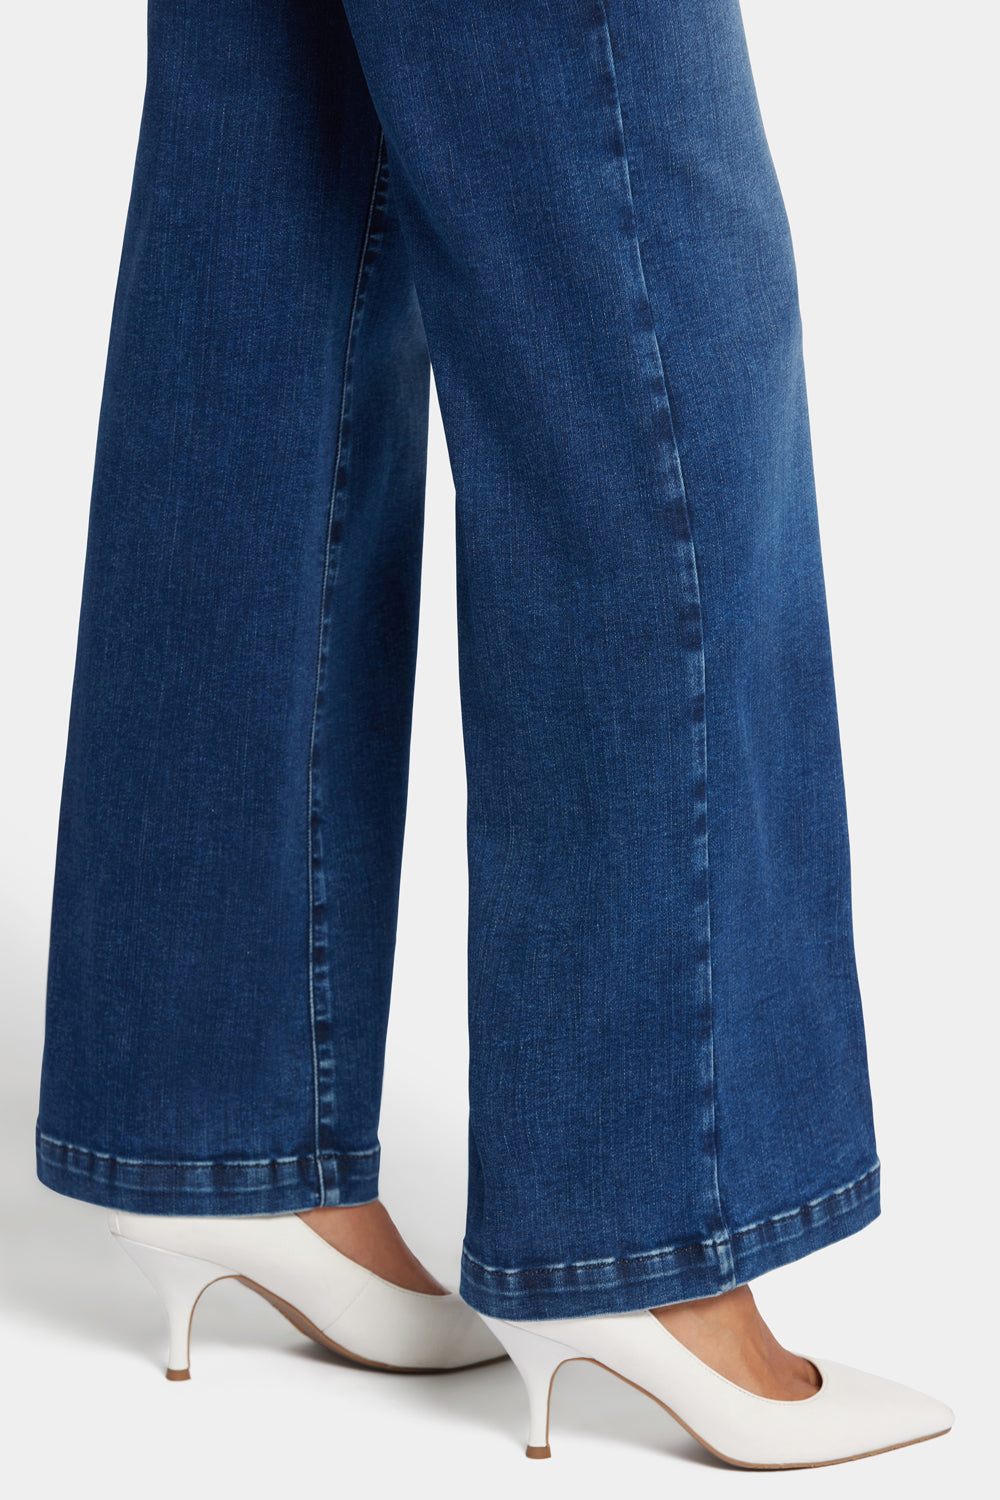 NYDJ Teresa Wide Leg Jeans in Tall With 36